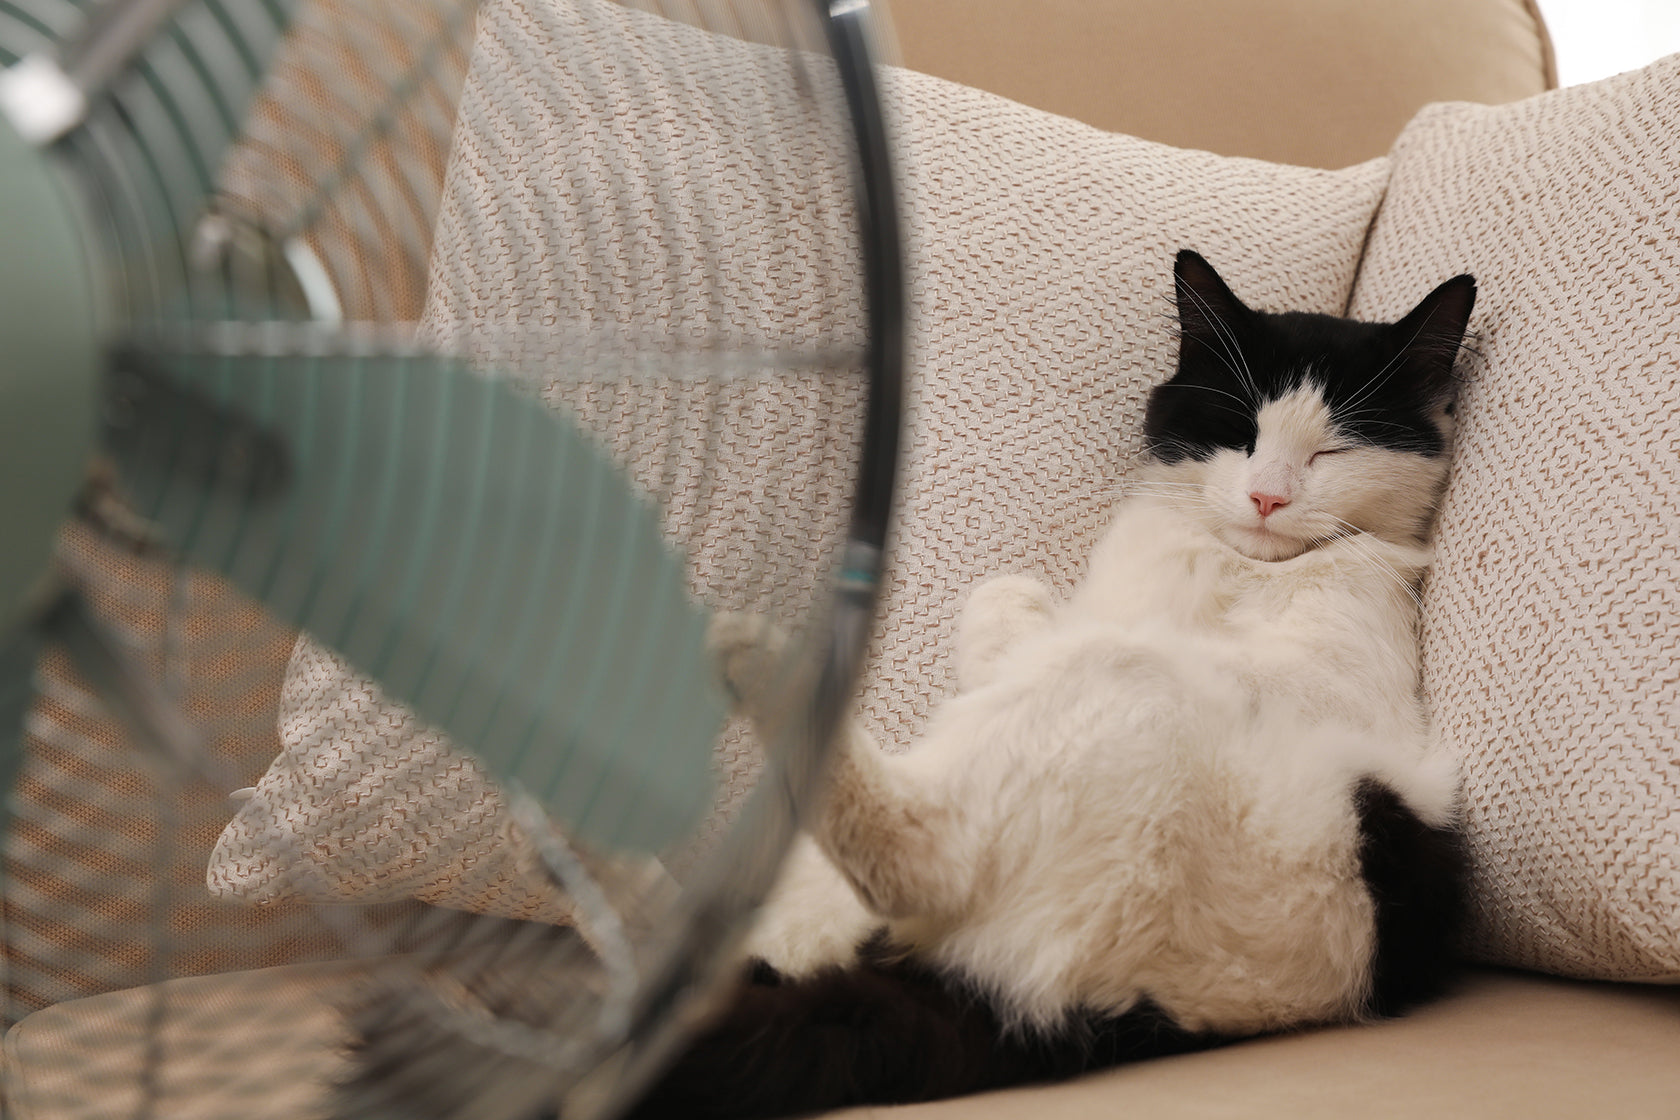 How do you prevent cats from getting overheated?